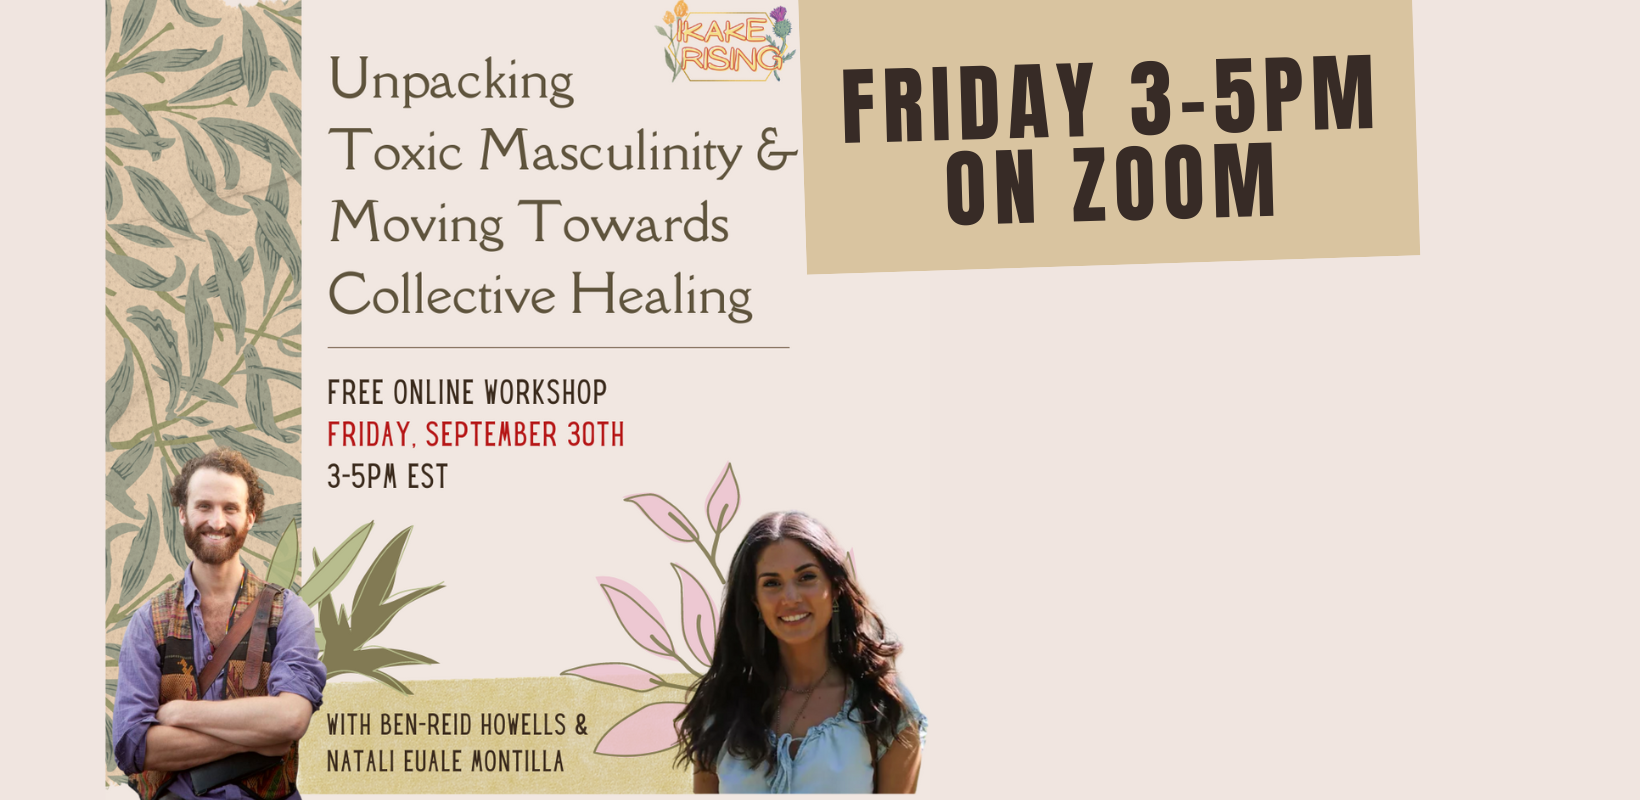 Friday 30 3pm - 5:30pm /Transforming Masculinity & Moving Towards Collective Healing/ (on Zoom)/ with Ikake Rising/ **an online workshop space for men and masculine people;  On the left there are green palm branches on a beige background. In the top right corner are the logos for Ikake Rising and OPIRG at York. / FREE ONLINE WORKSHOP/ FRIDAY SEPTEMBER 30th/ 3-5pm EST/ With Ben Reid Howells and Natali Euale Montilla. At the bottom right is a photo of Ben—a white man smiling, arms crossed, red hair and beard. On the bottom right is a photo of Natali—a brown woman with long brown hair, a blue shirt.